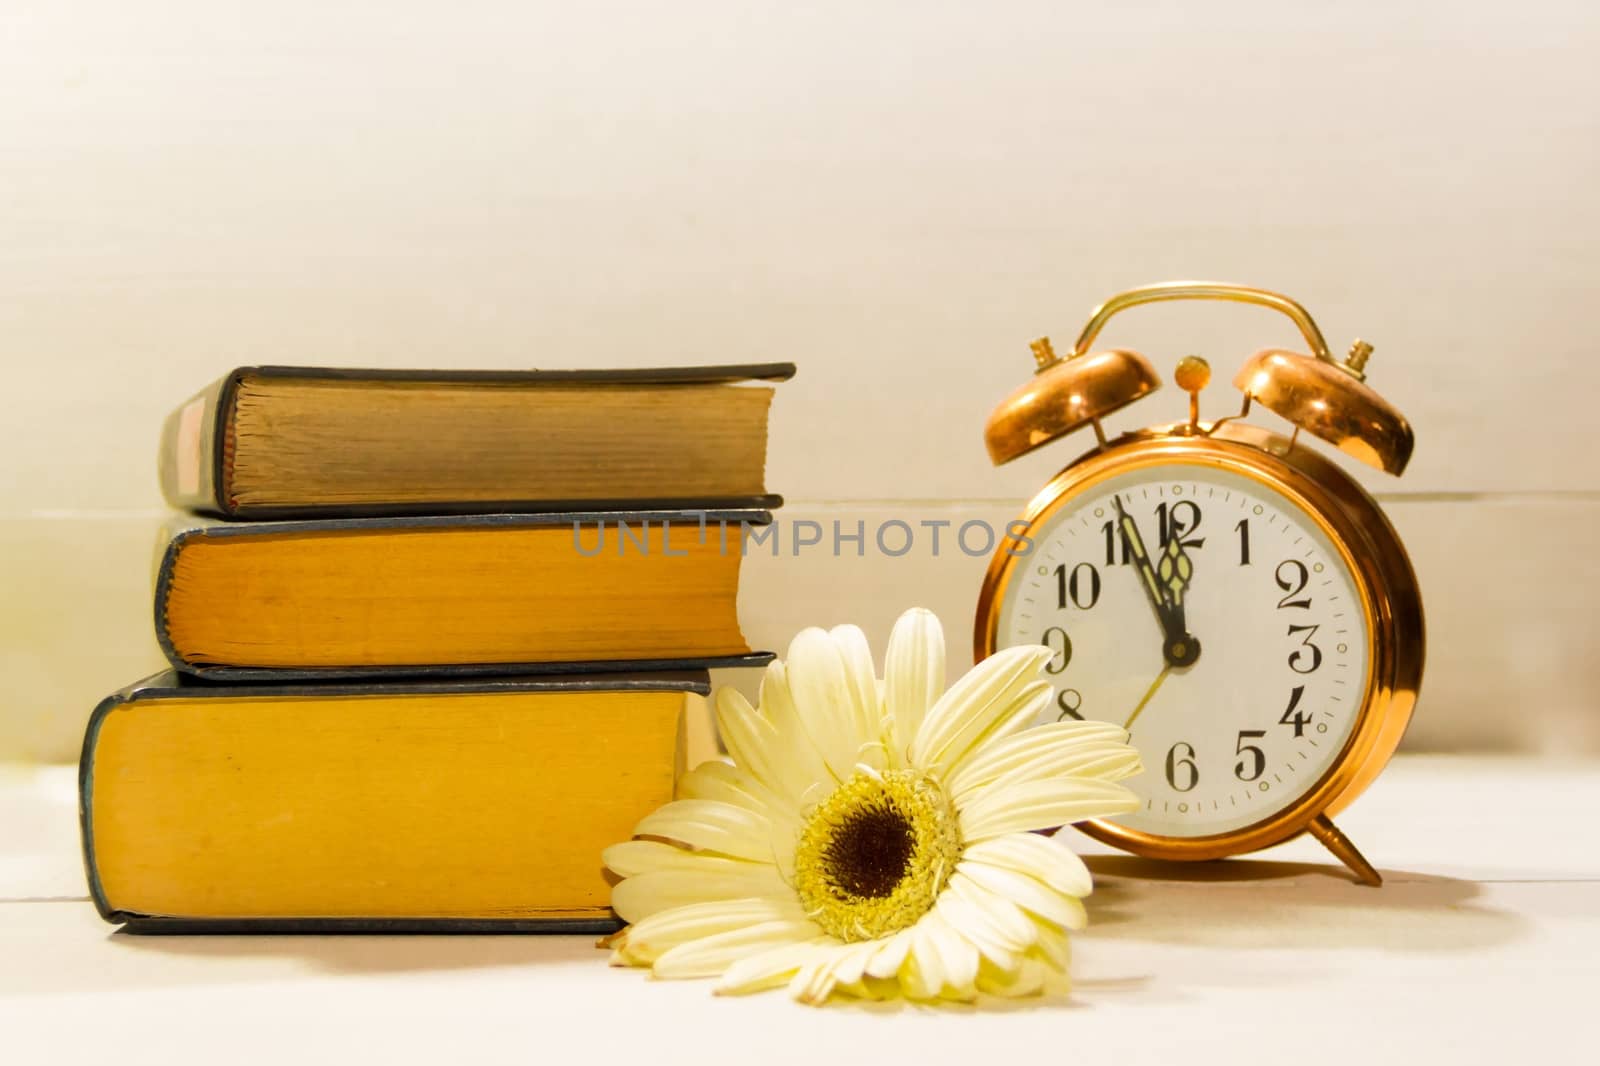 clock flowers and books concept of spring time and reading